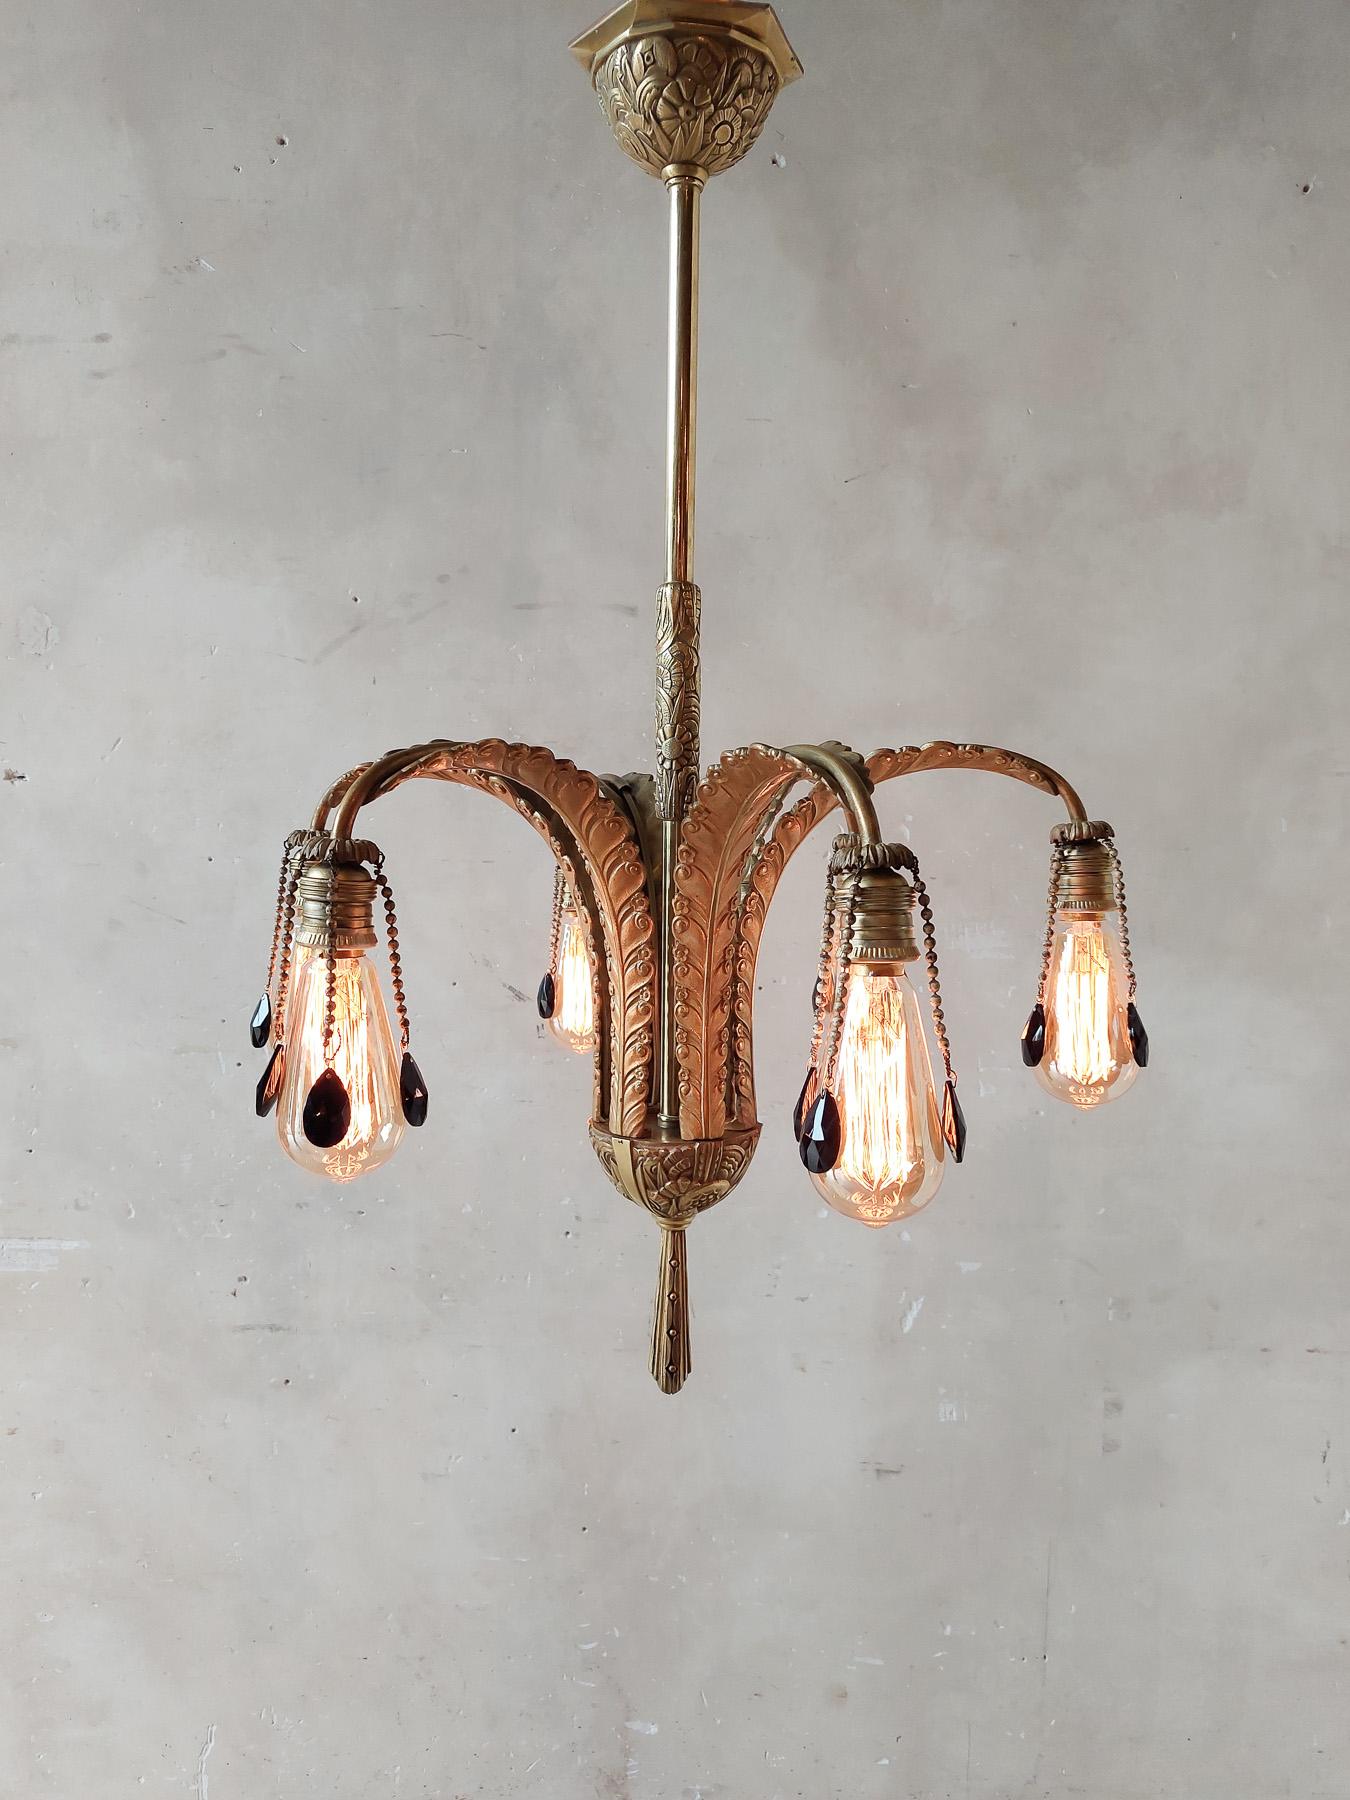 Midcentury brass chandelier with palm leaf / feather shaped arms with black pearls at the 6 light points. 

‘Great Gatsby’ ‘Charleston’ style ceiling lamp. 

With the Edison bulbs in it, this lamp seems to come straight from the set of ‘Peaky